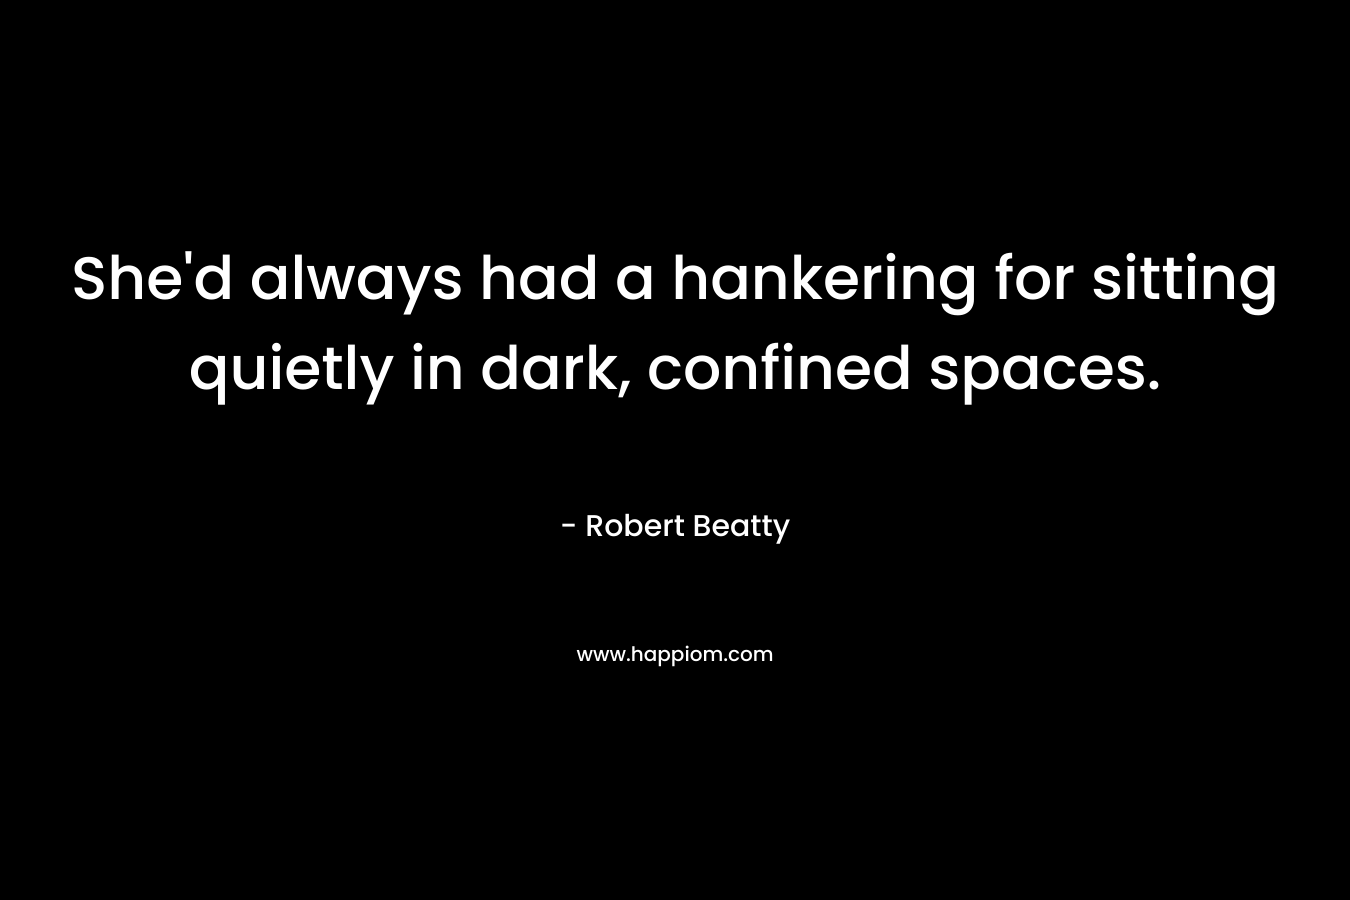 She’d always had a hankering for sitting quietly in dark, confined spaces. – Robert Beatty